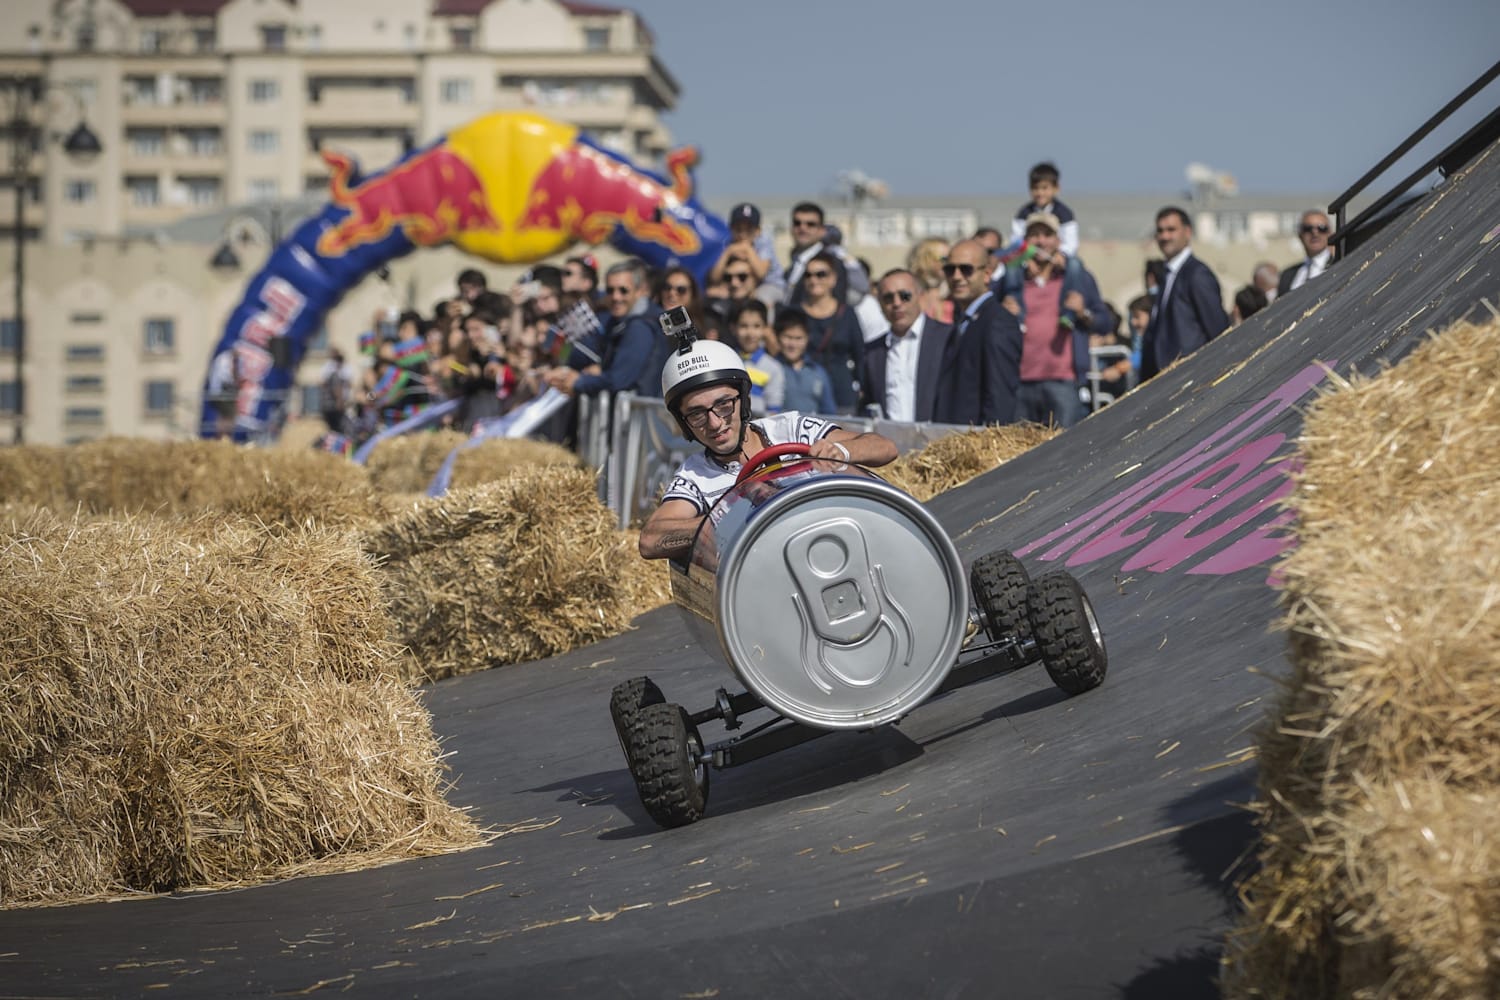 red bull soap box derby 2017